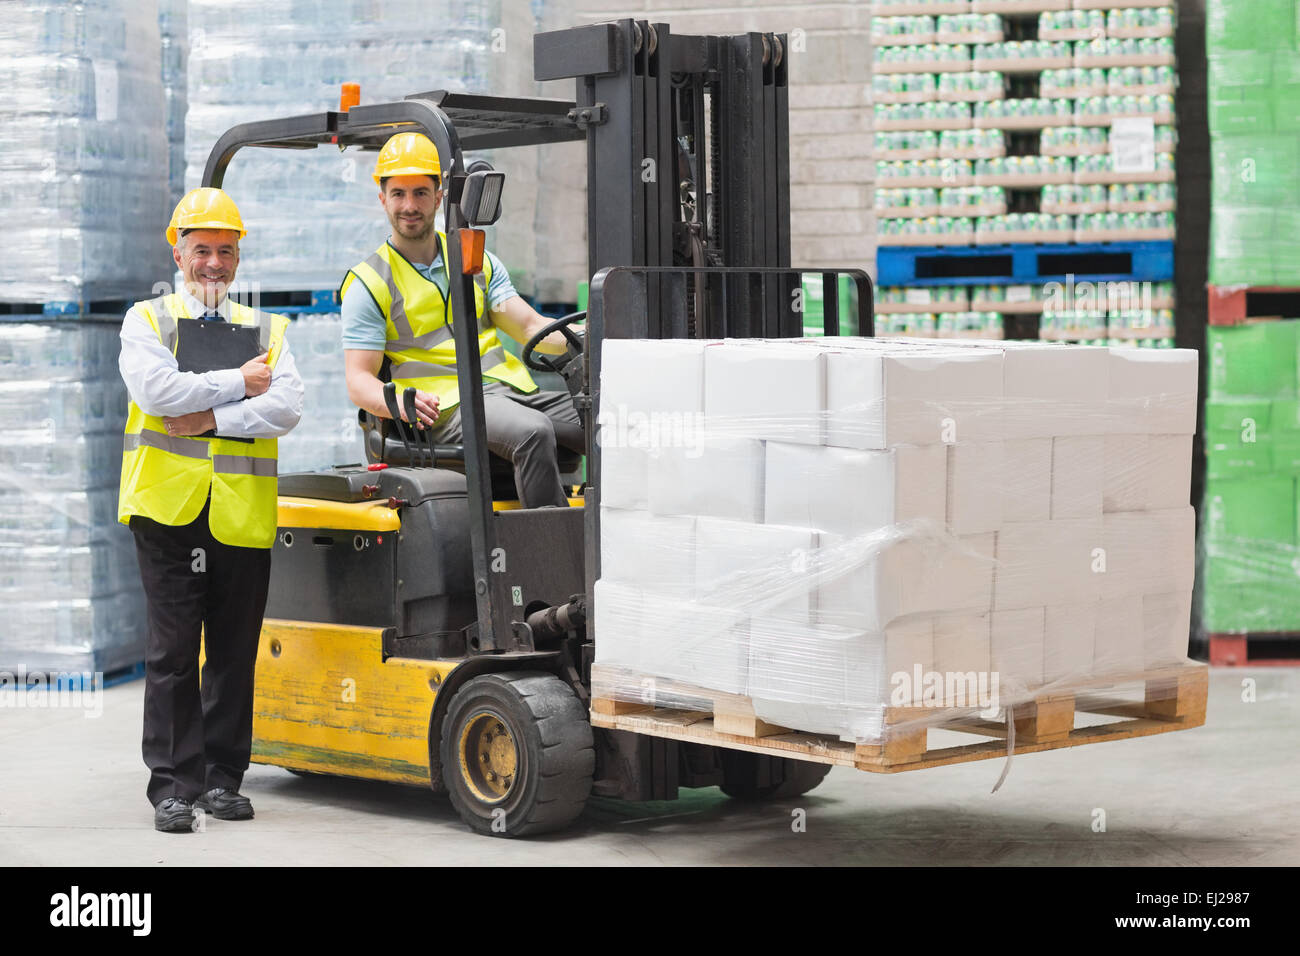 Driver operating forklift machine next to his manager Stock Photo